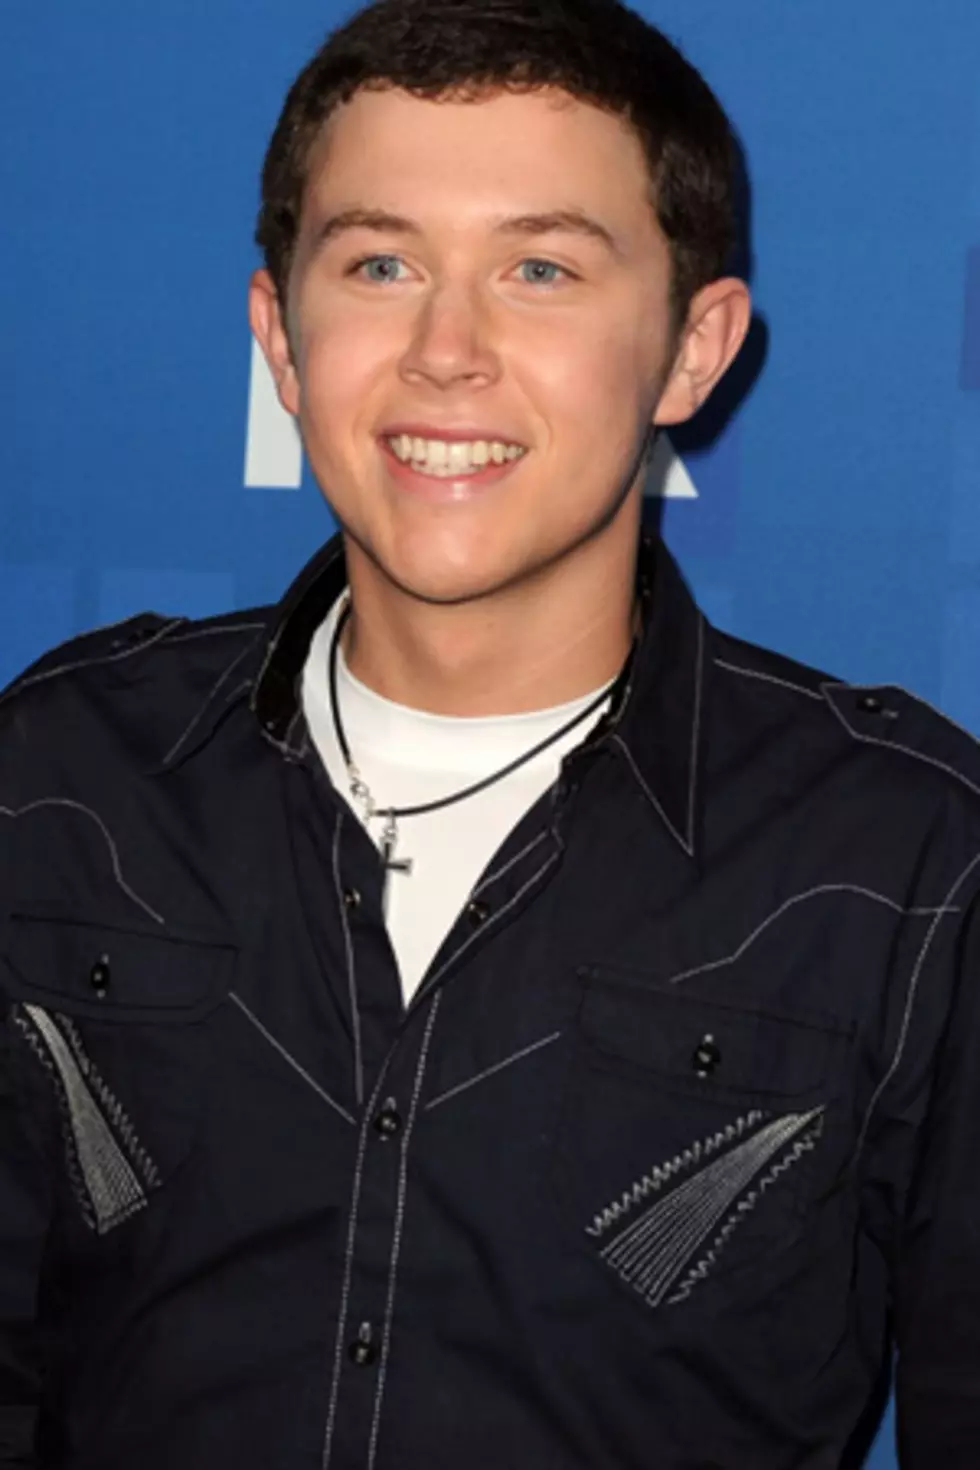 Scotty McCreery Mania Hits During Hometown Visit